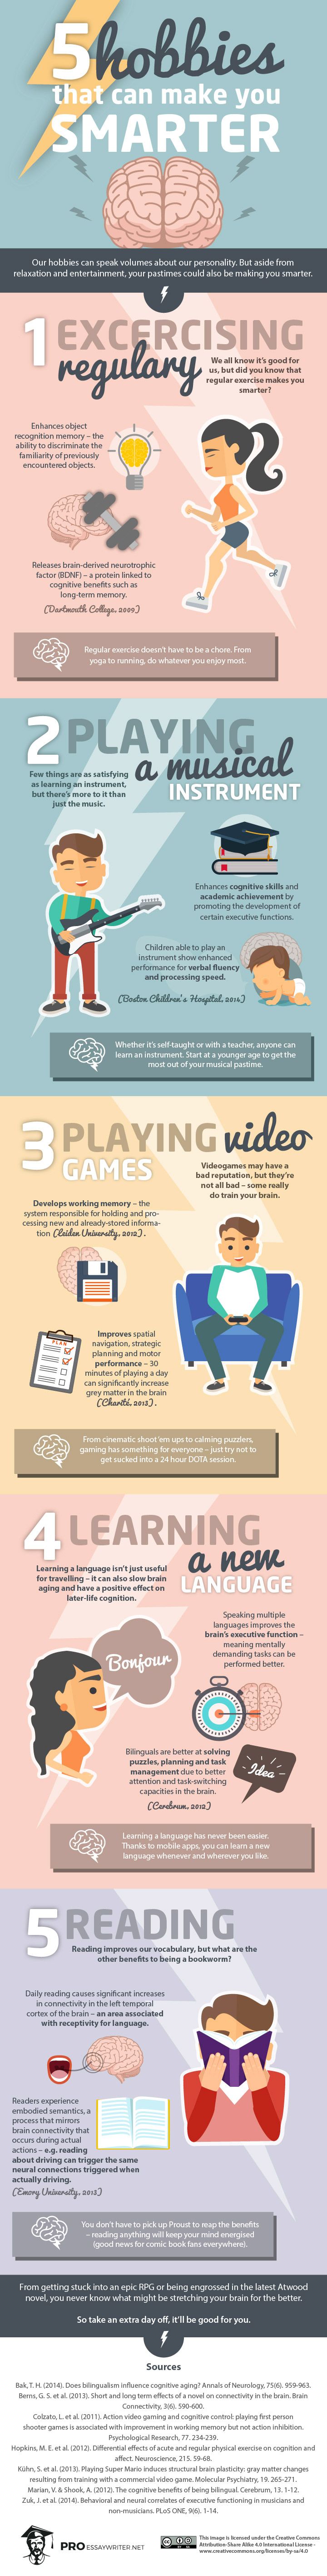 5 Hobbies That Can Make You Smarter (Infographic) | Entrepreneur